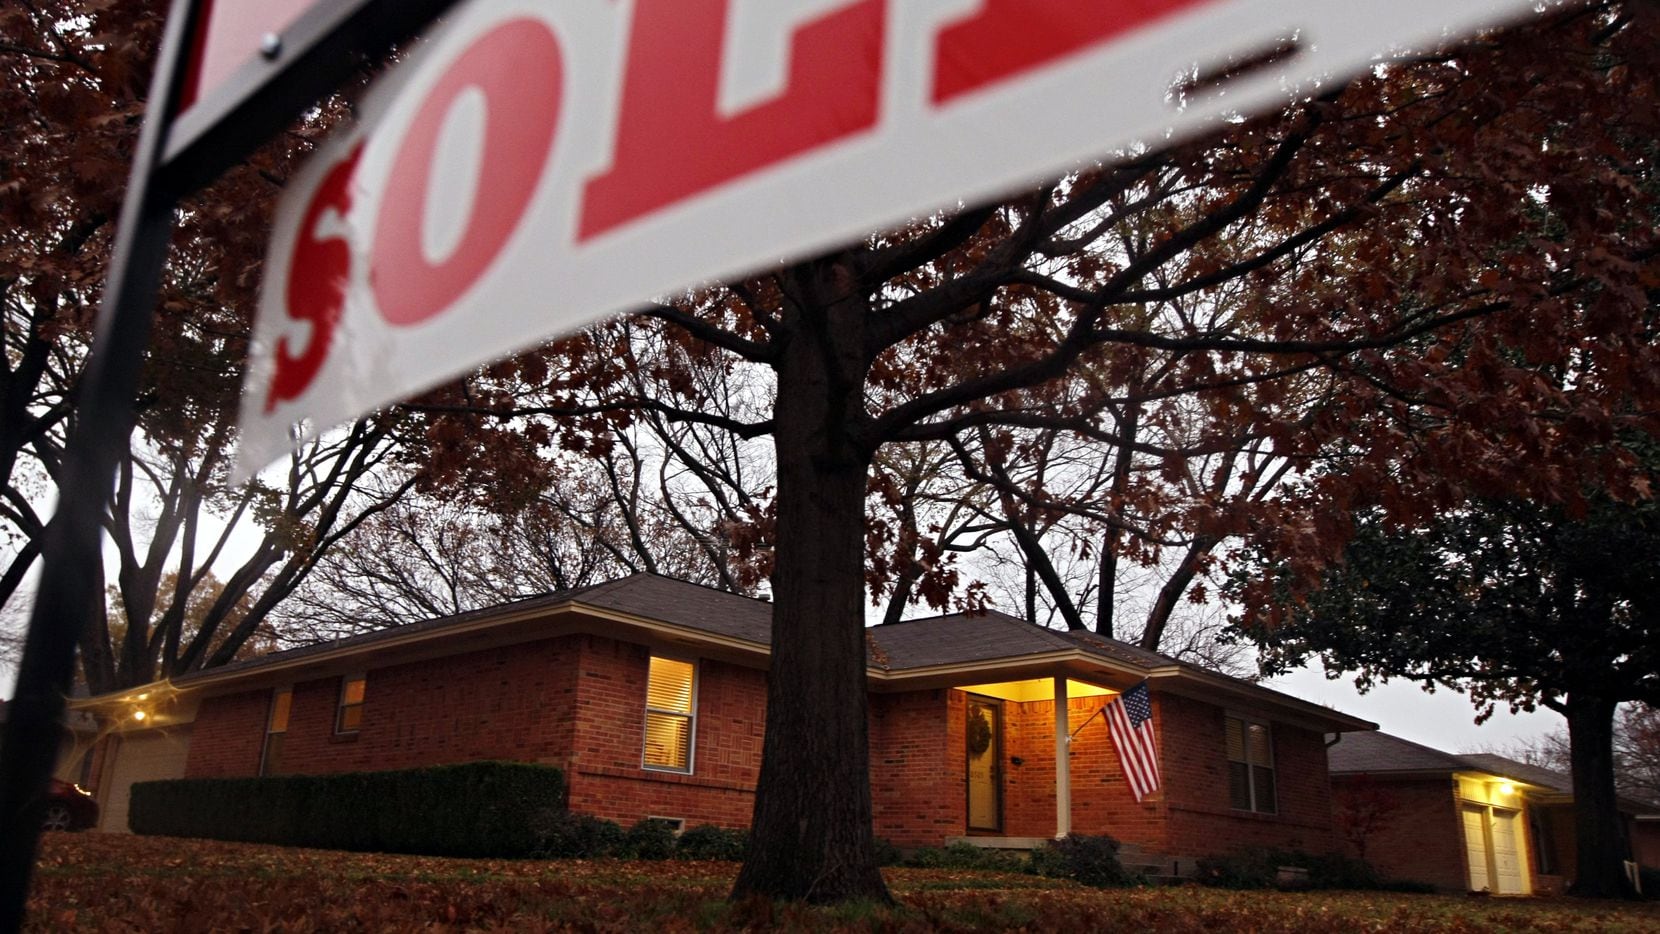 North Texas home sales were down 1 percent in August from a year ago.